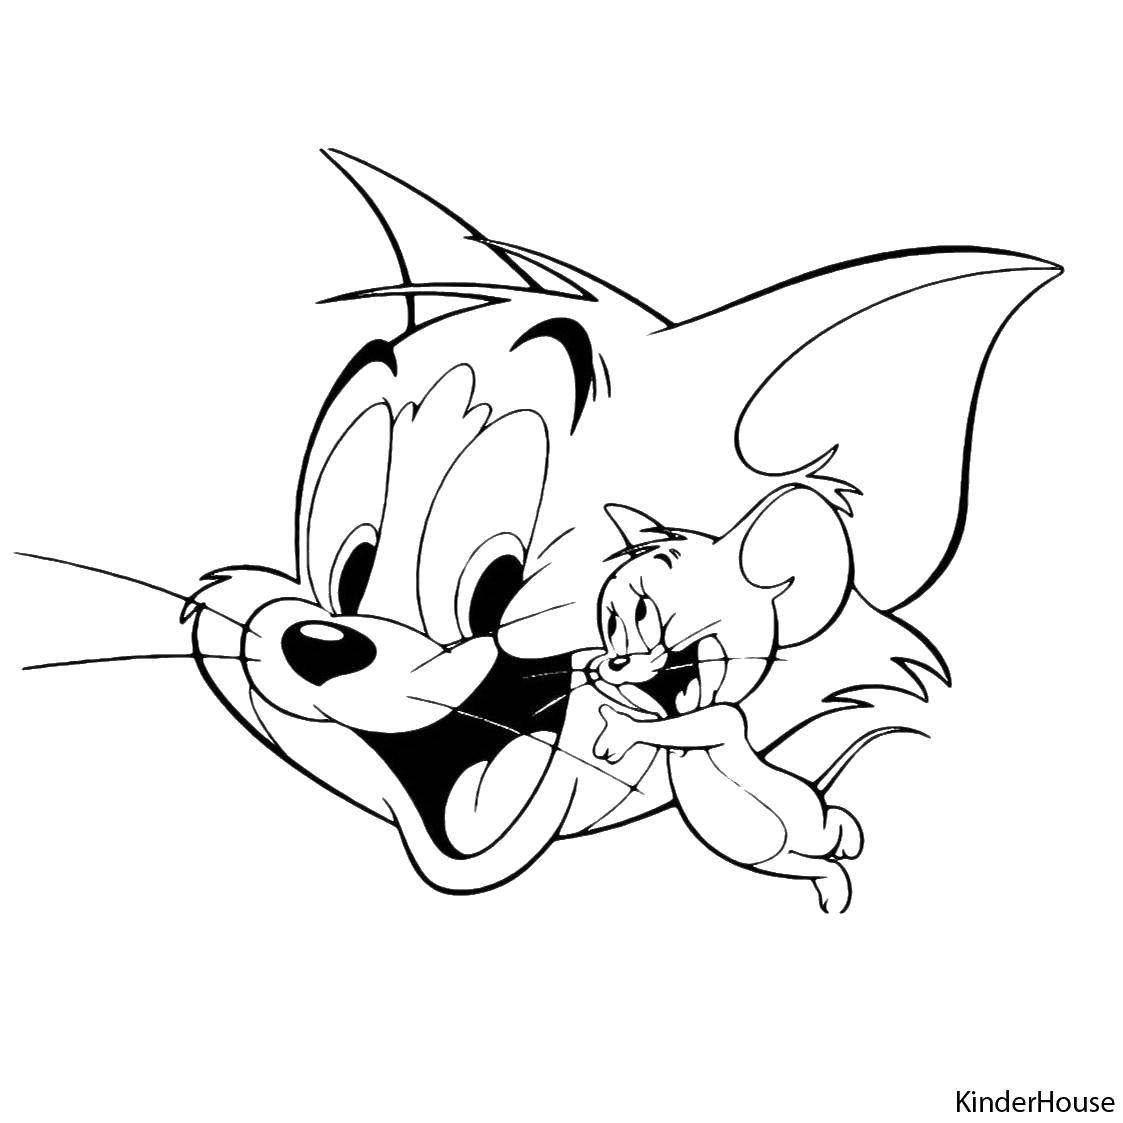 Coloring Tom and Jerry are friends.. Category Tom and Jerry. Tags:  Character cartoon, Tom and Jerry.